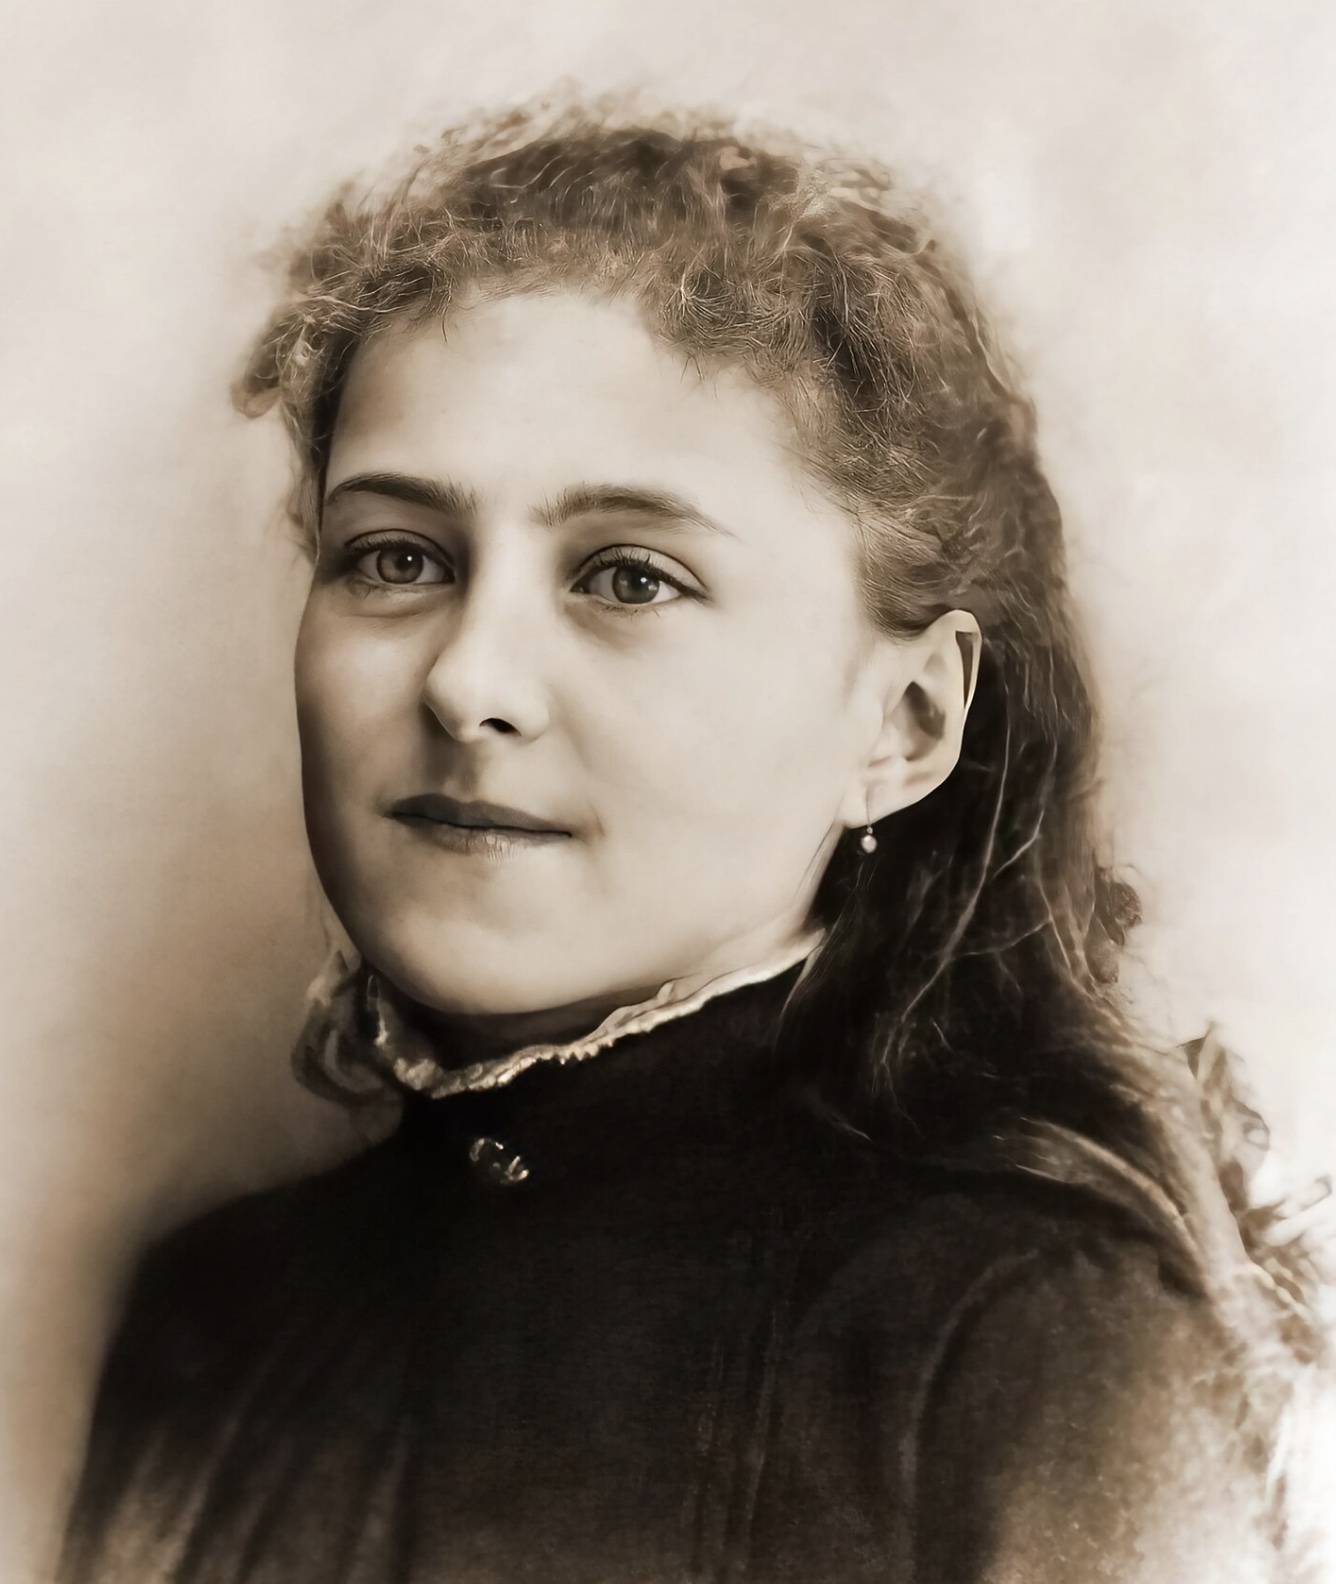 St Therese as a child